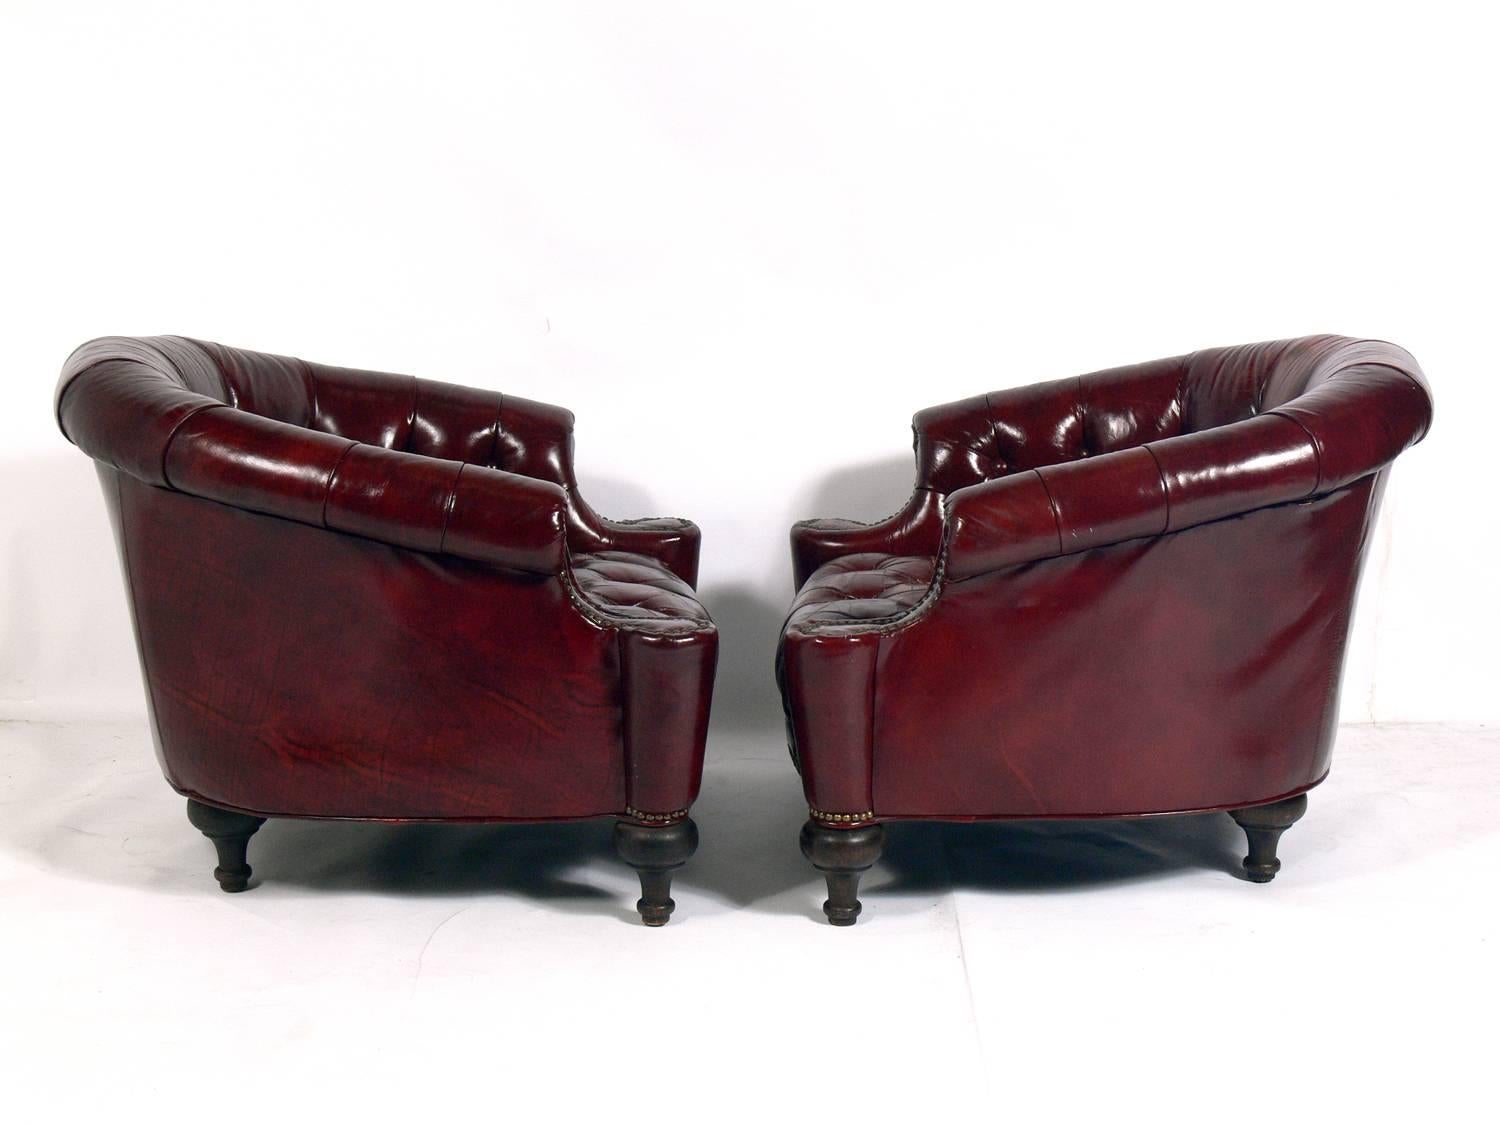 Pair of Tufted Oxblood Red Leather Club Chairs, probably English, circa 1940s. They have outstanding Chesterfield styling with deep tufting, brass tack details and a perfectly worn patina. 